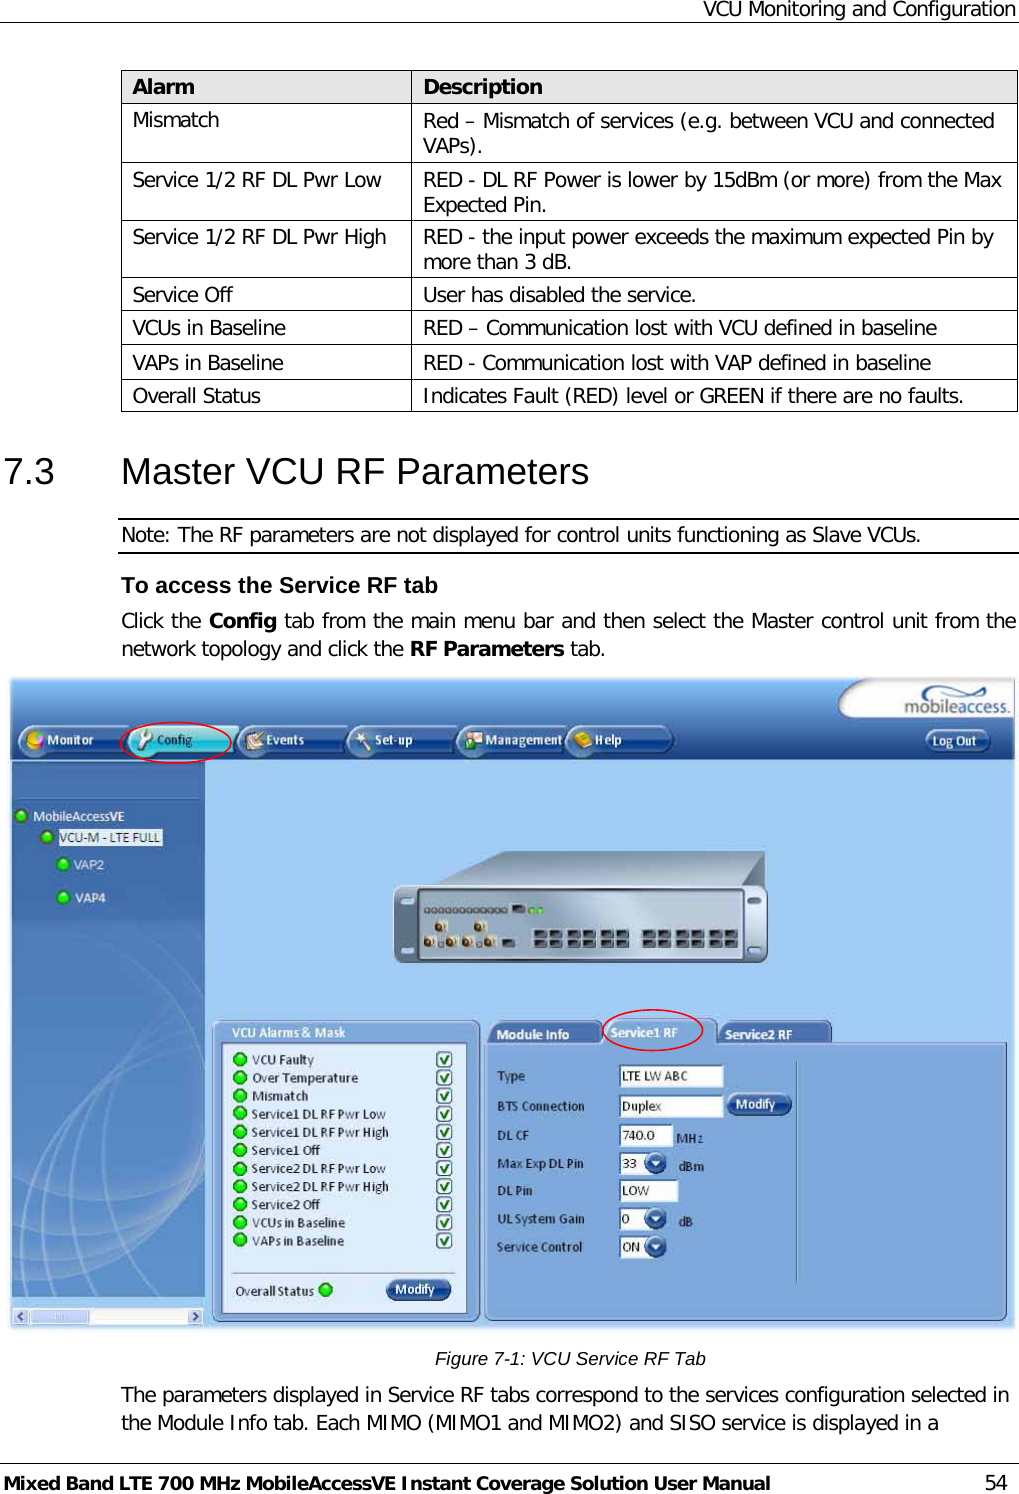 VCU Monitoring and Configuration Mixed Band LTE 700 MHz MobileAccessVE Instant Coverage Solution User Manual  54 Alarm Description Mismatch  Red – Mismatch of services (e.g. between VCU and connected VAPs). Service 1/2 RF DL Pwr Low RED - DL RF Power is lower by 15dBm (or more) from the Max Expected Pin. Service 1/2 RF DL Pwr High RED - the input power exceeds the maximum expected Pin by more than 3 dB. Service Off User has disabled the service. VCUs in Baseline RED – Communication lost with VCU defined in baseline  VAPs in Baseline RED - Communication lost with VAP defined in baseline Overall Status Indicates Fault (RED) level or GREEN if there are no faults. 7.3  Master VCU RF Parameters Note: The RF parameters are not displayed for control units functioning as Slave VCUs.  To access the Service RF tab Click the Config tab from the main menu bar and then select the Master control unit from the network topology and click the RF Parameters tab.   Figure  7-1: VCU Service RF Tab The parameters displayed in Service RF tabs correspond to the services configuration selected in the Module Info tab. Each MIMO (MIMO1 and MIMO2) and SISO service is displayed in a 